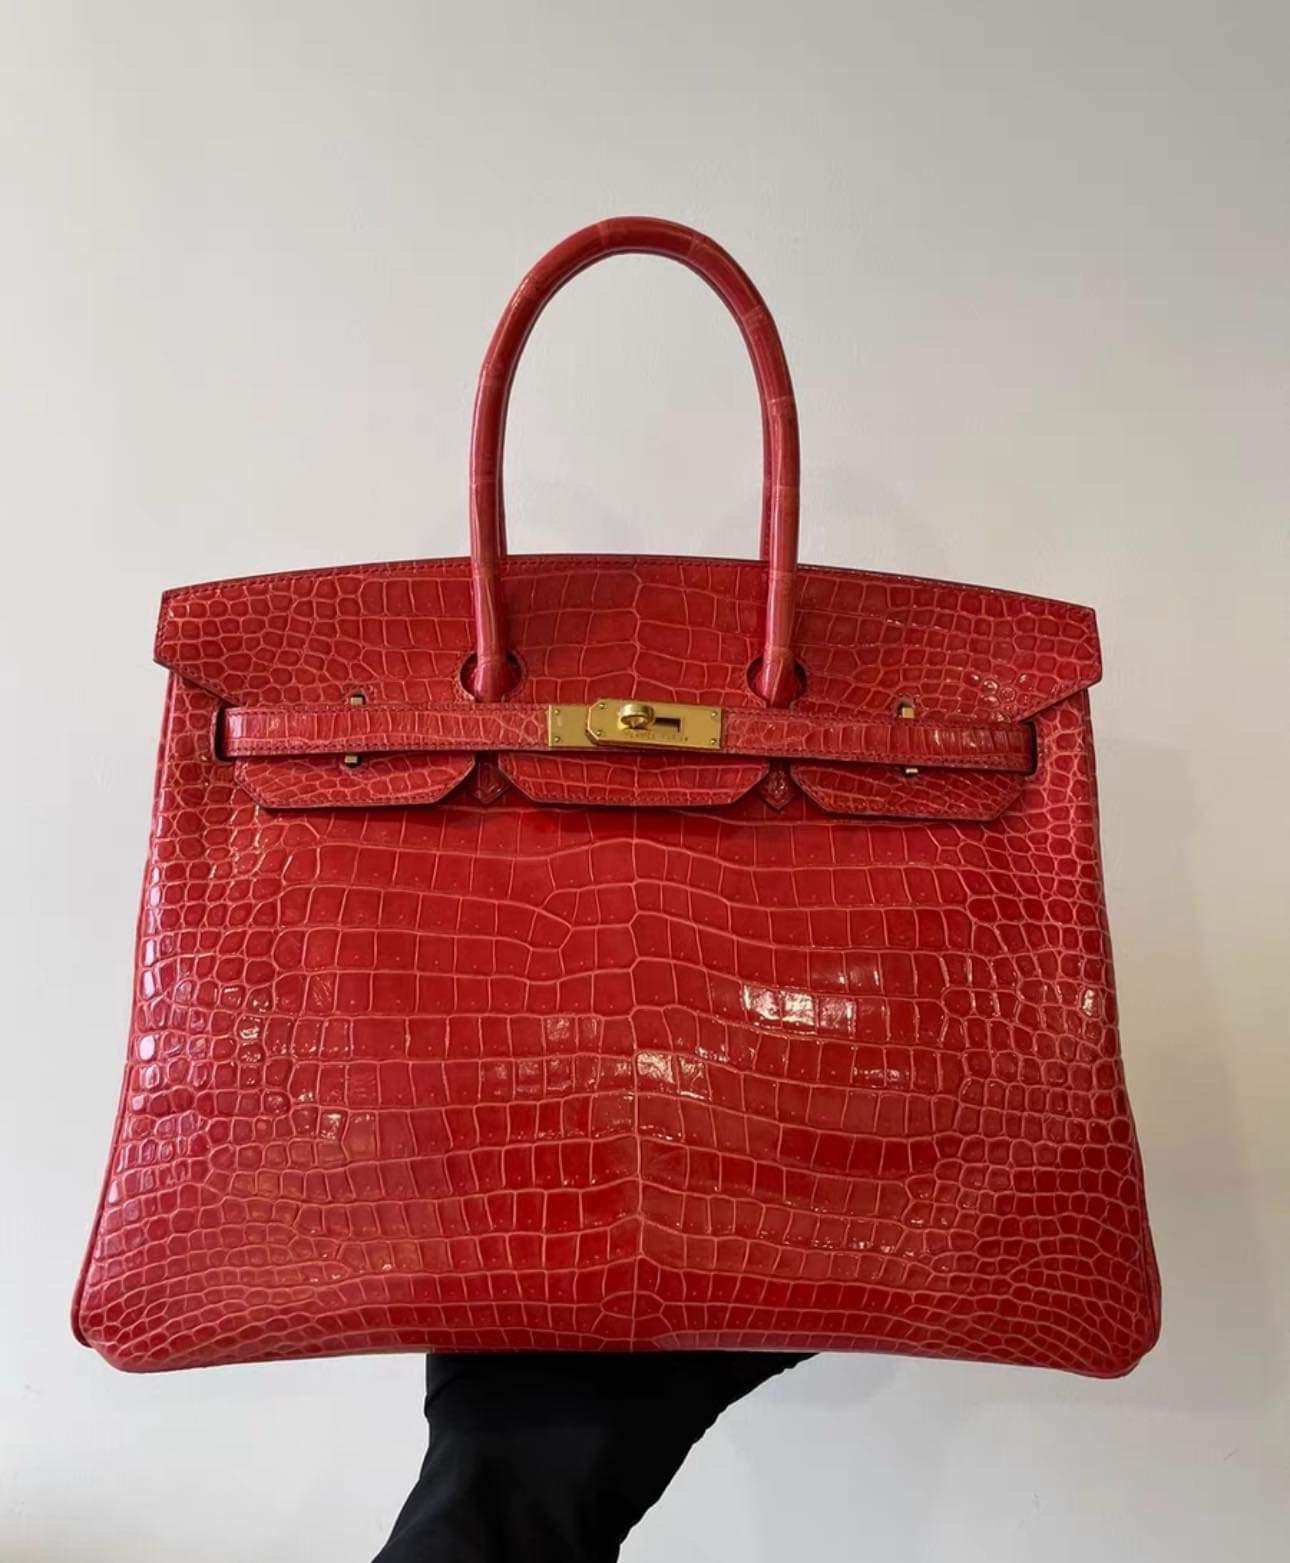 Hermes Birkin 35 Shiny Red Porosus Crocodile Bag with Gold Hardware. Bag comes with dust bag, 2 keys, locker and clochette. No plastic protection on feet.
Guaranteed authentic Hermes Birkin Red 35 Bag.
Porosus Crocodile is the most rare and